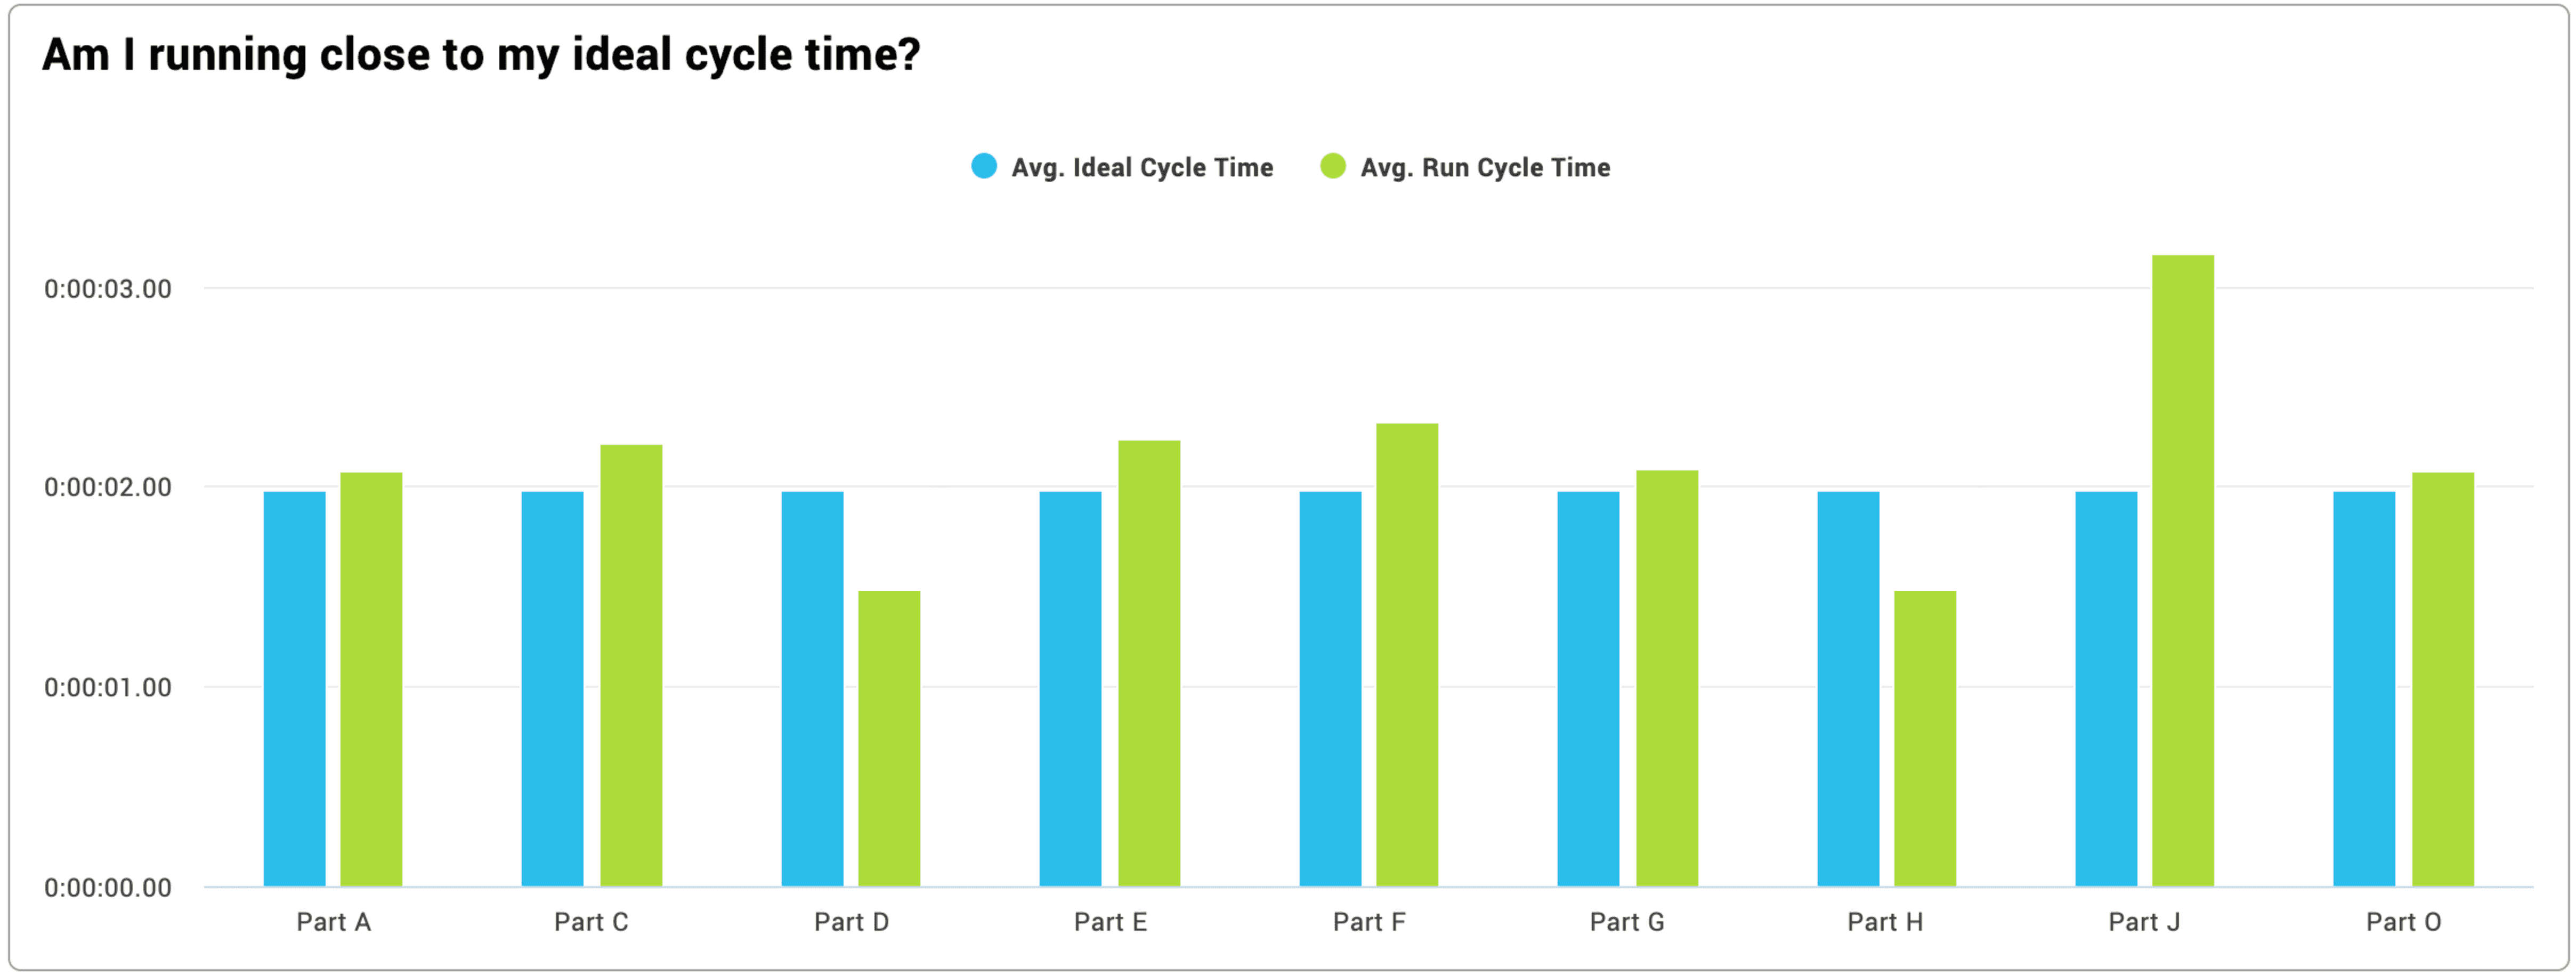 Image of a bar chart showing ideal cycle time by part.